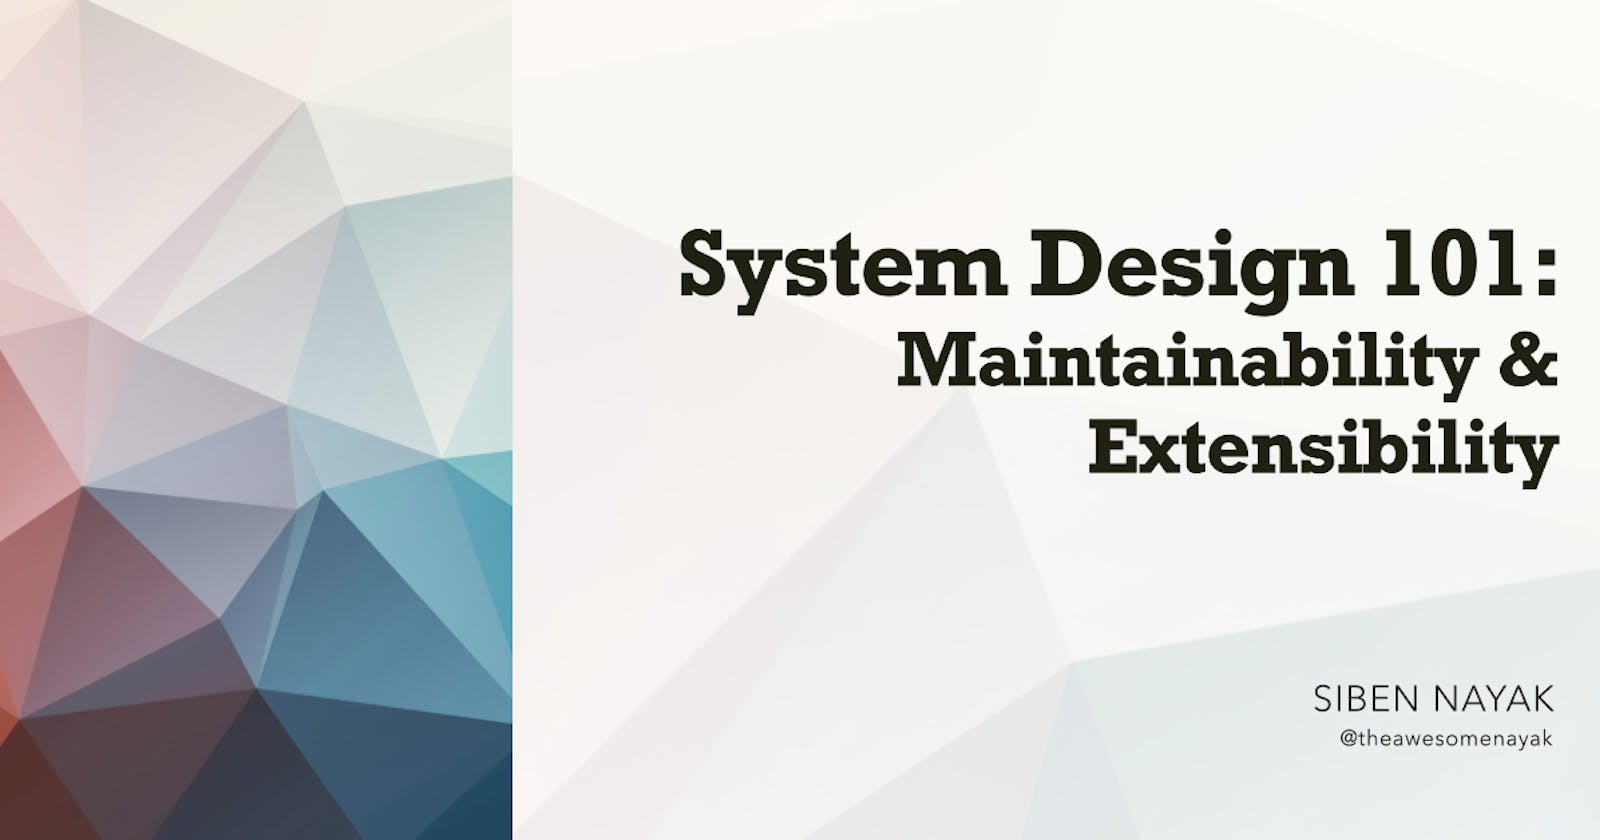 System Design 101 - Maintainability & Extensibility